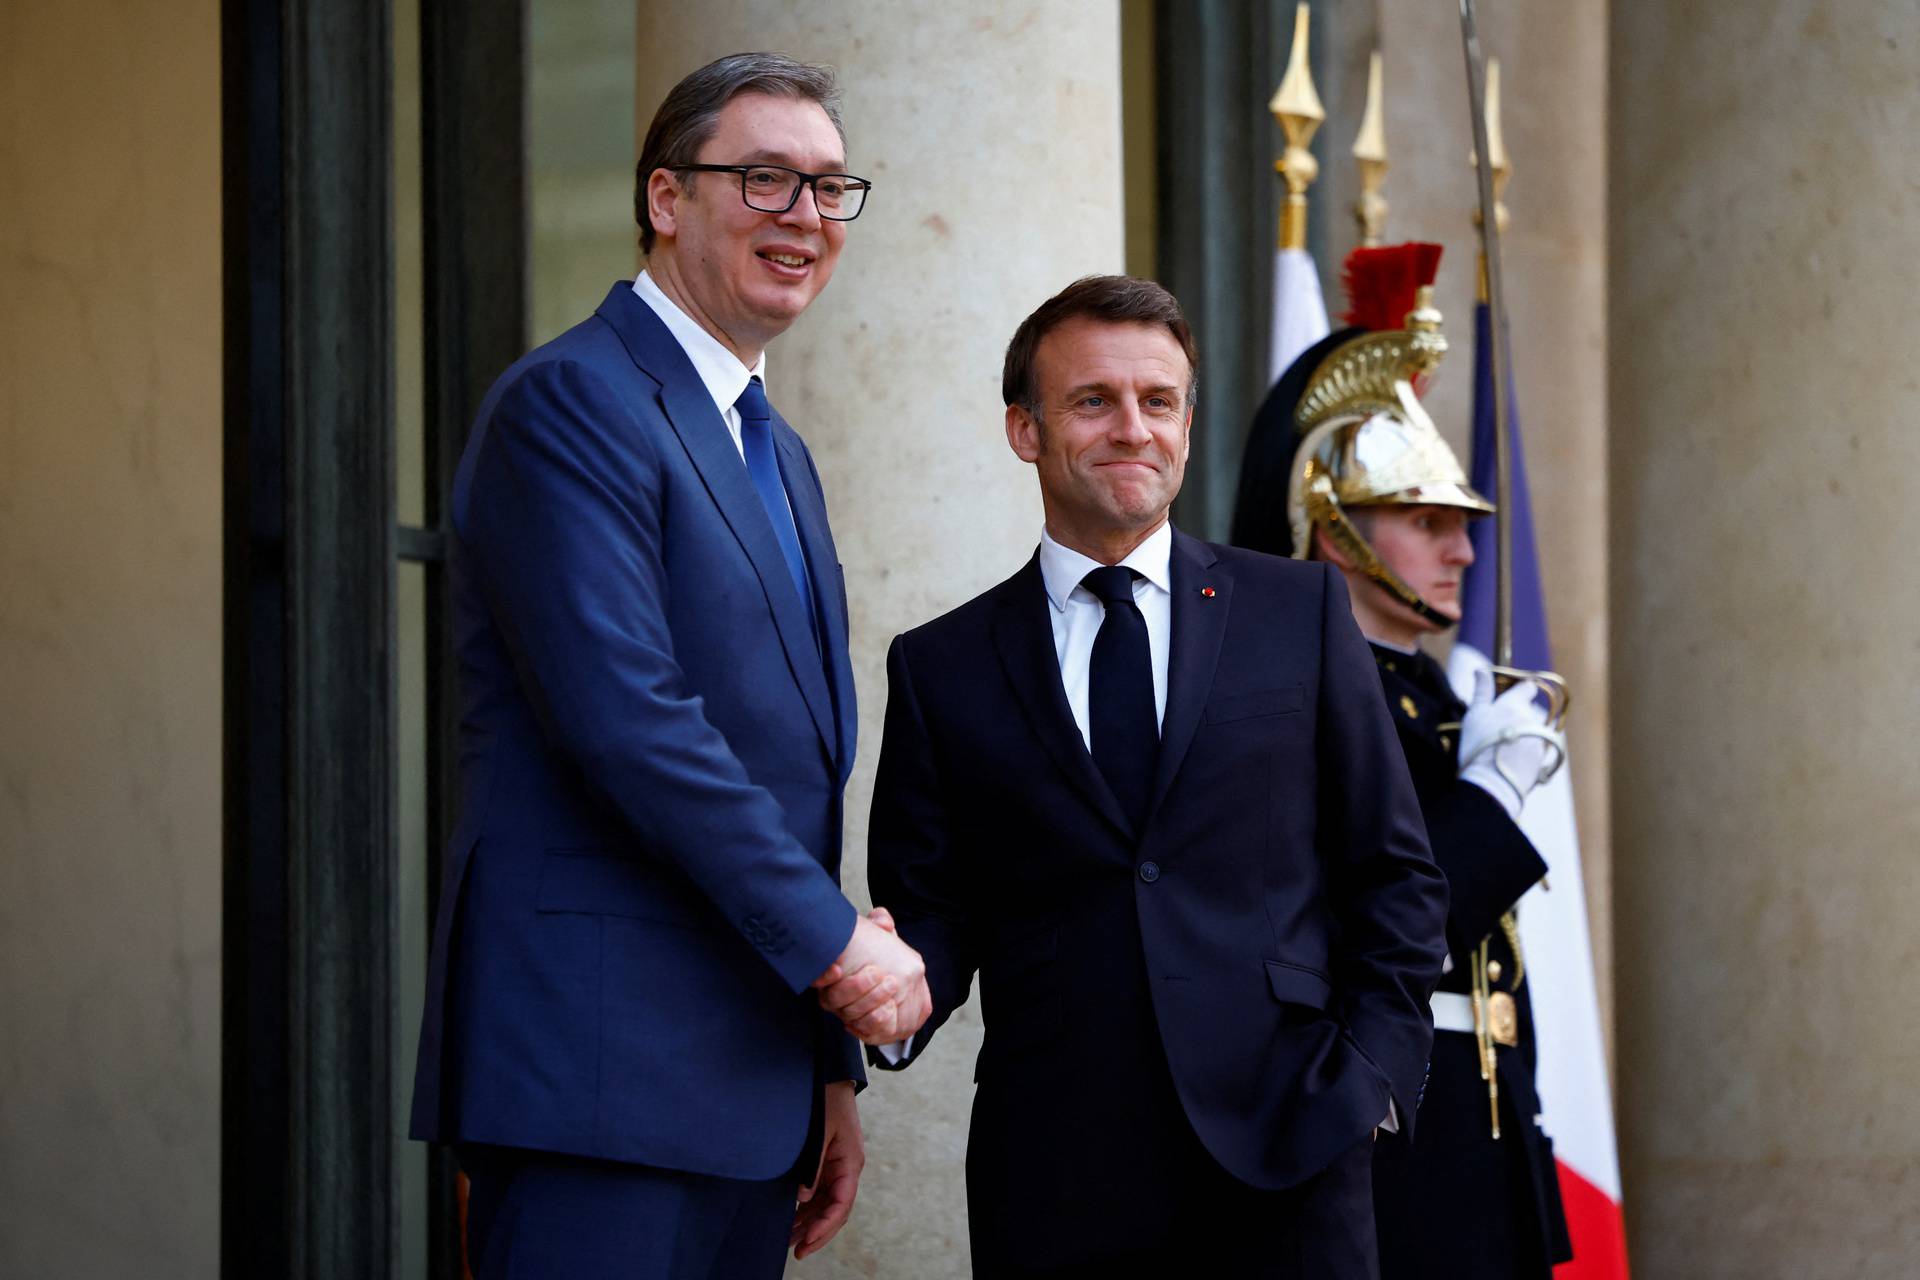 French President Macron meets Serbian President Vucic in Paris